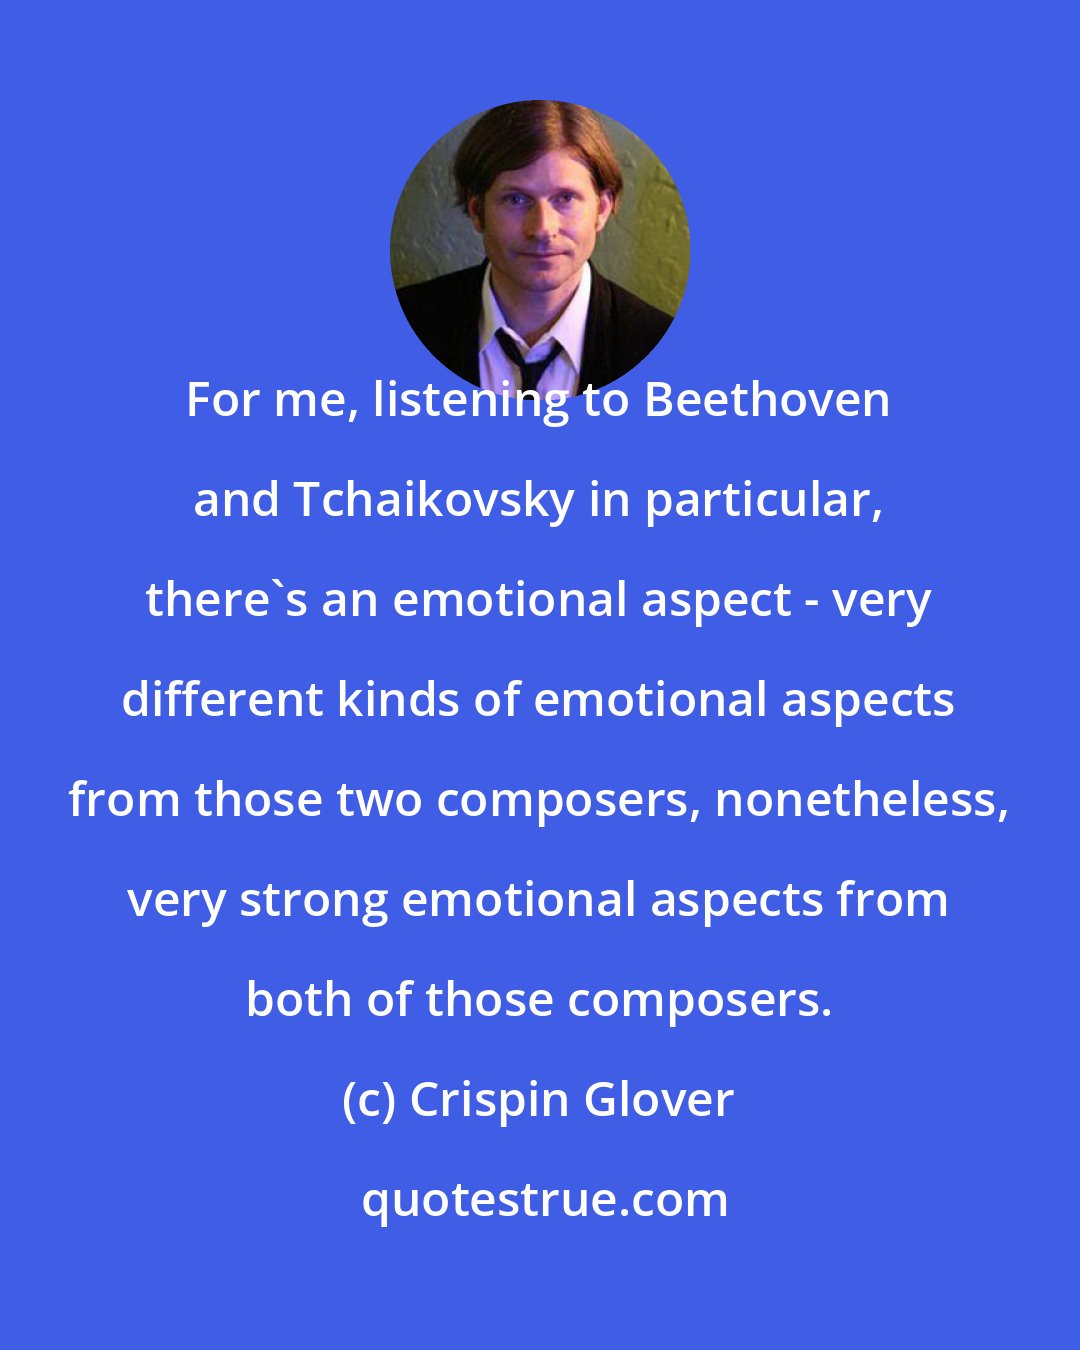 Crispin Glover: For me, listening to Beethoven and Tchaikovsky in particular, there's an emotional aspect - very different kinds of emotional aspects from those two composers, nonetheless, very strong emotional aspects from both of those composers.